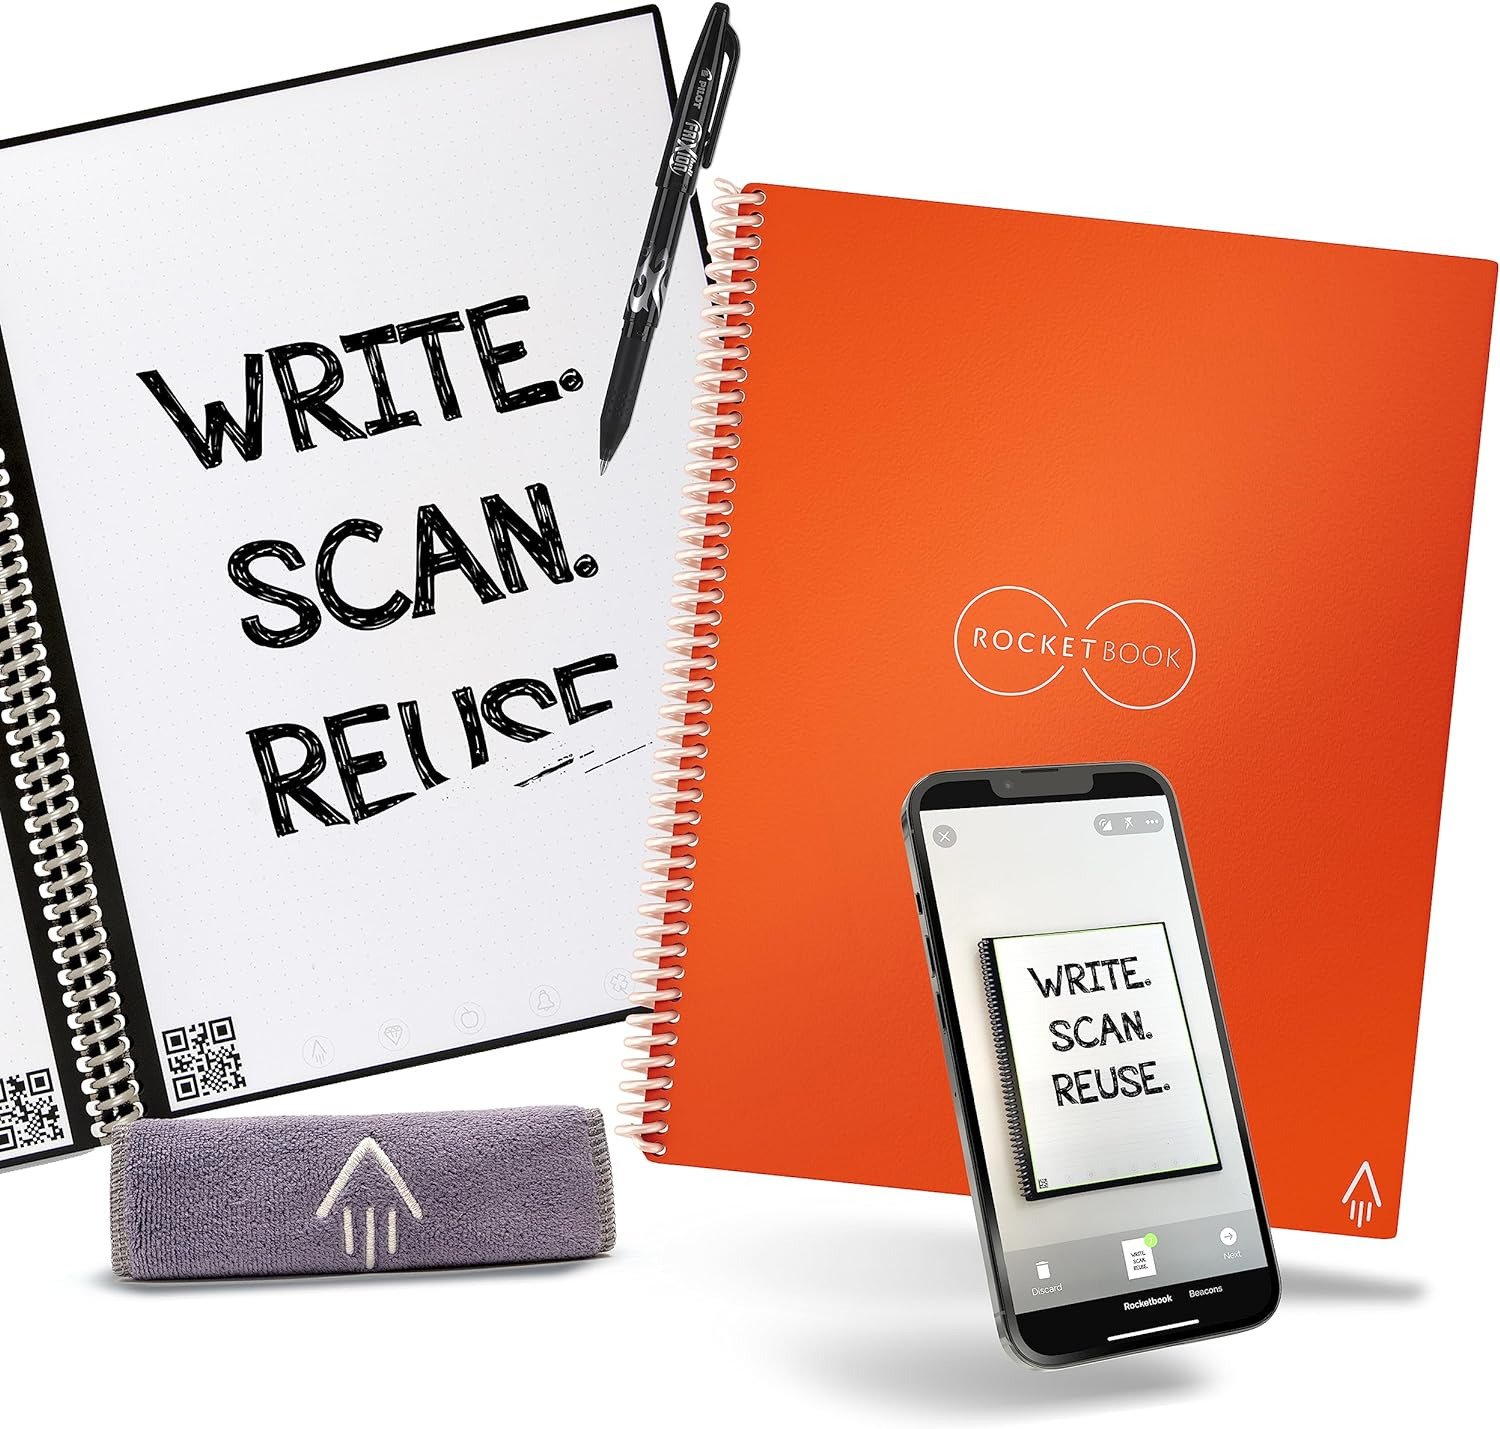 Smart notebook with writing and phone